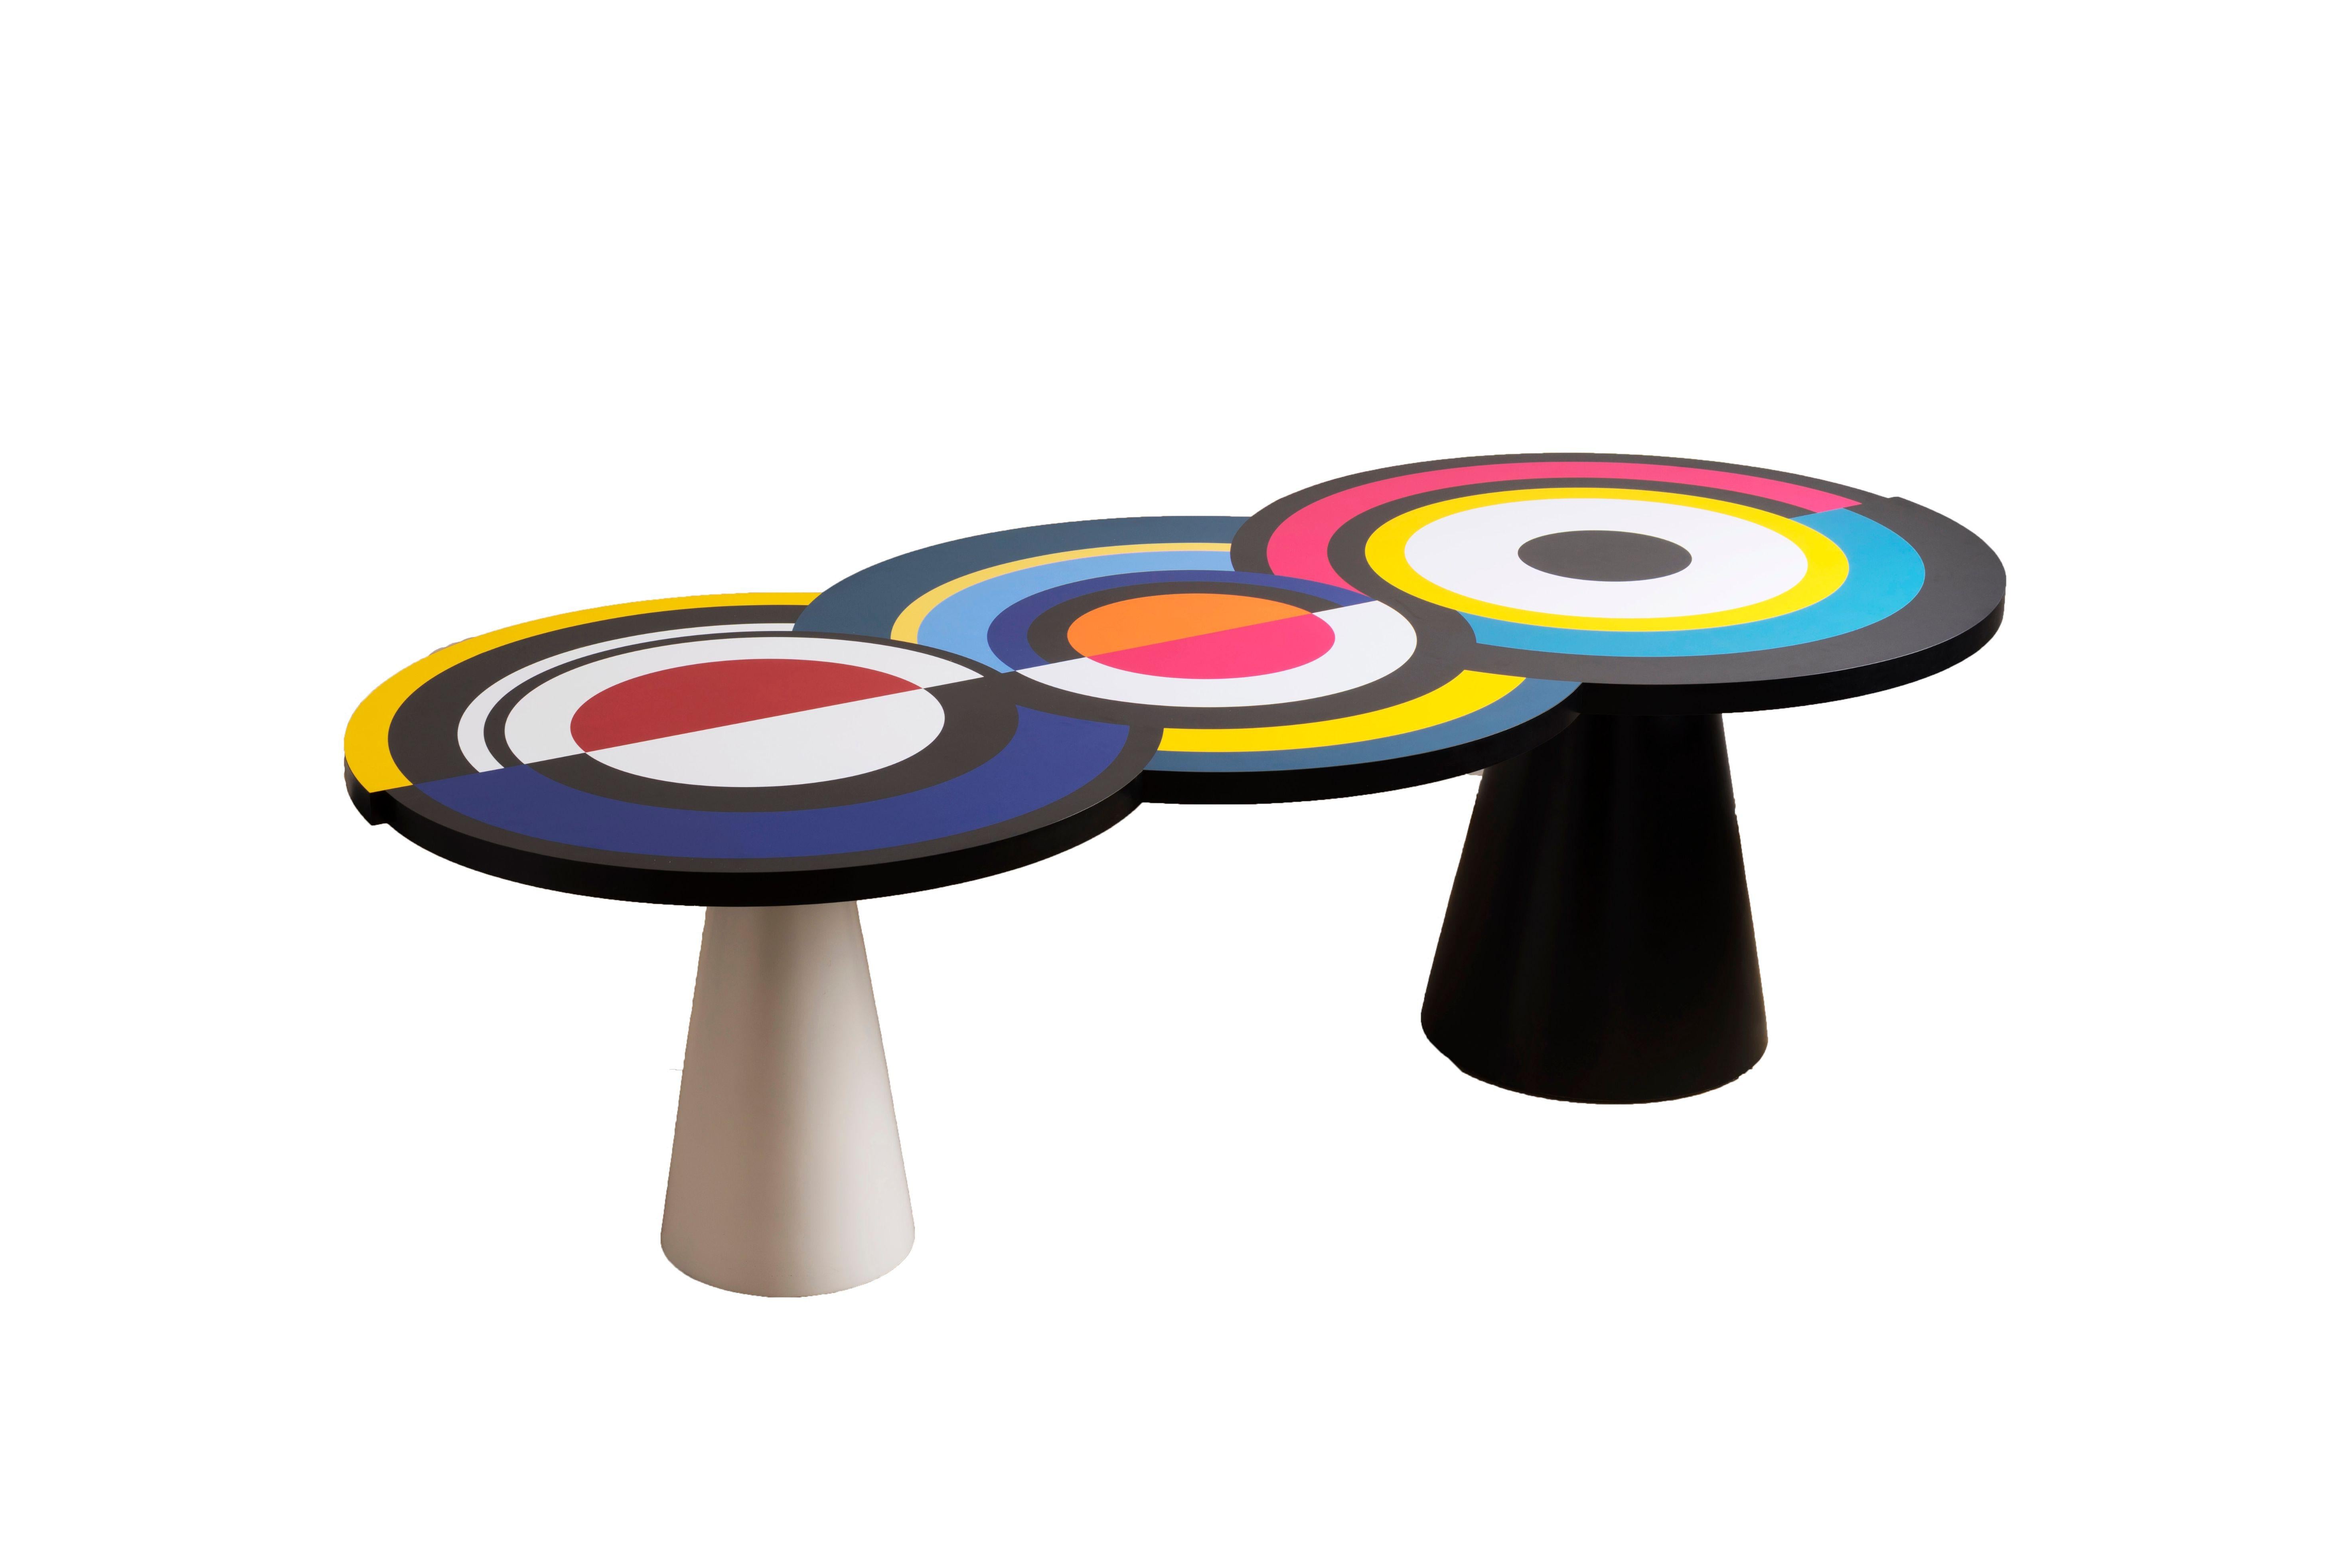 French Homage to Delaunay Dining Table by Thomas Dariel